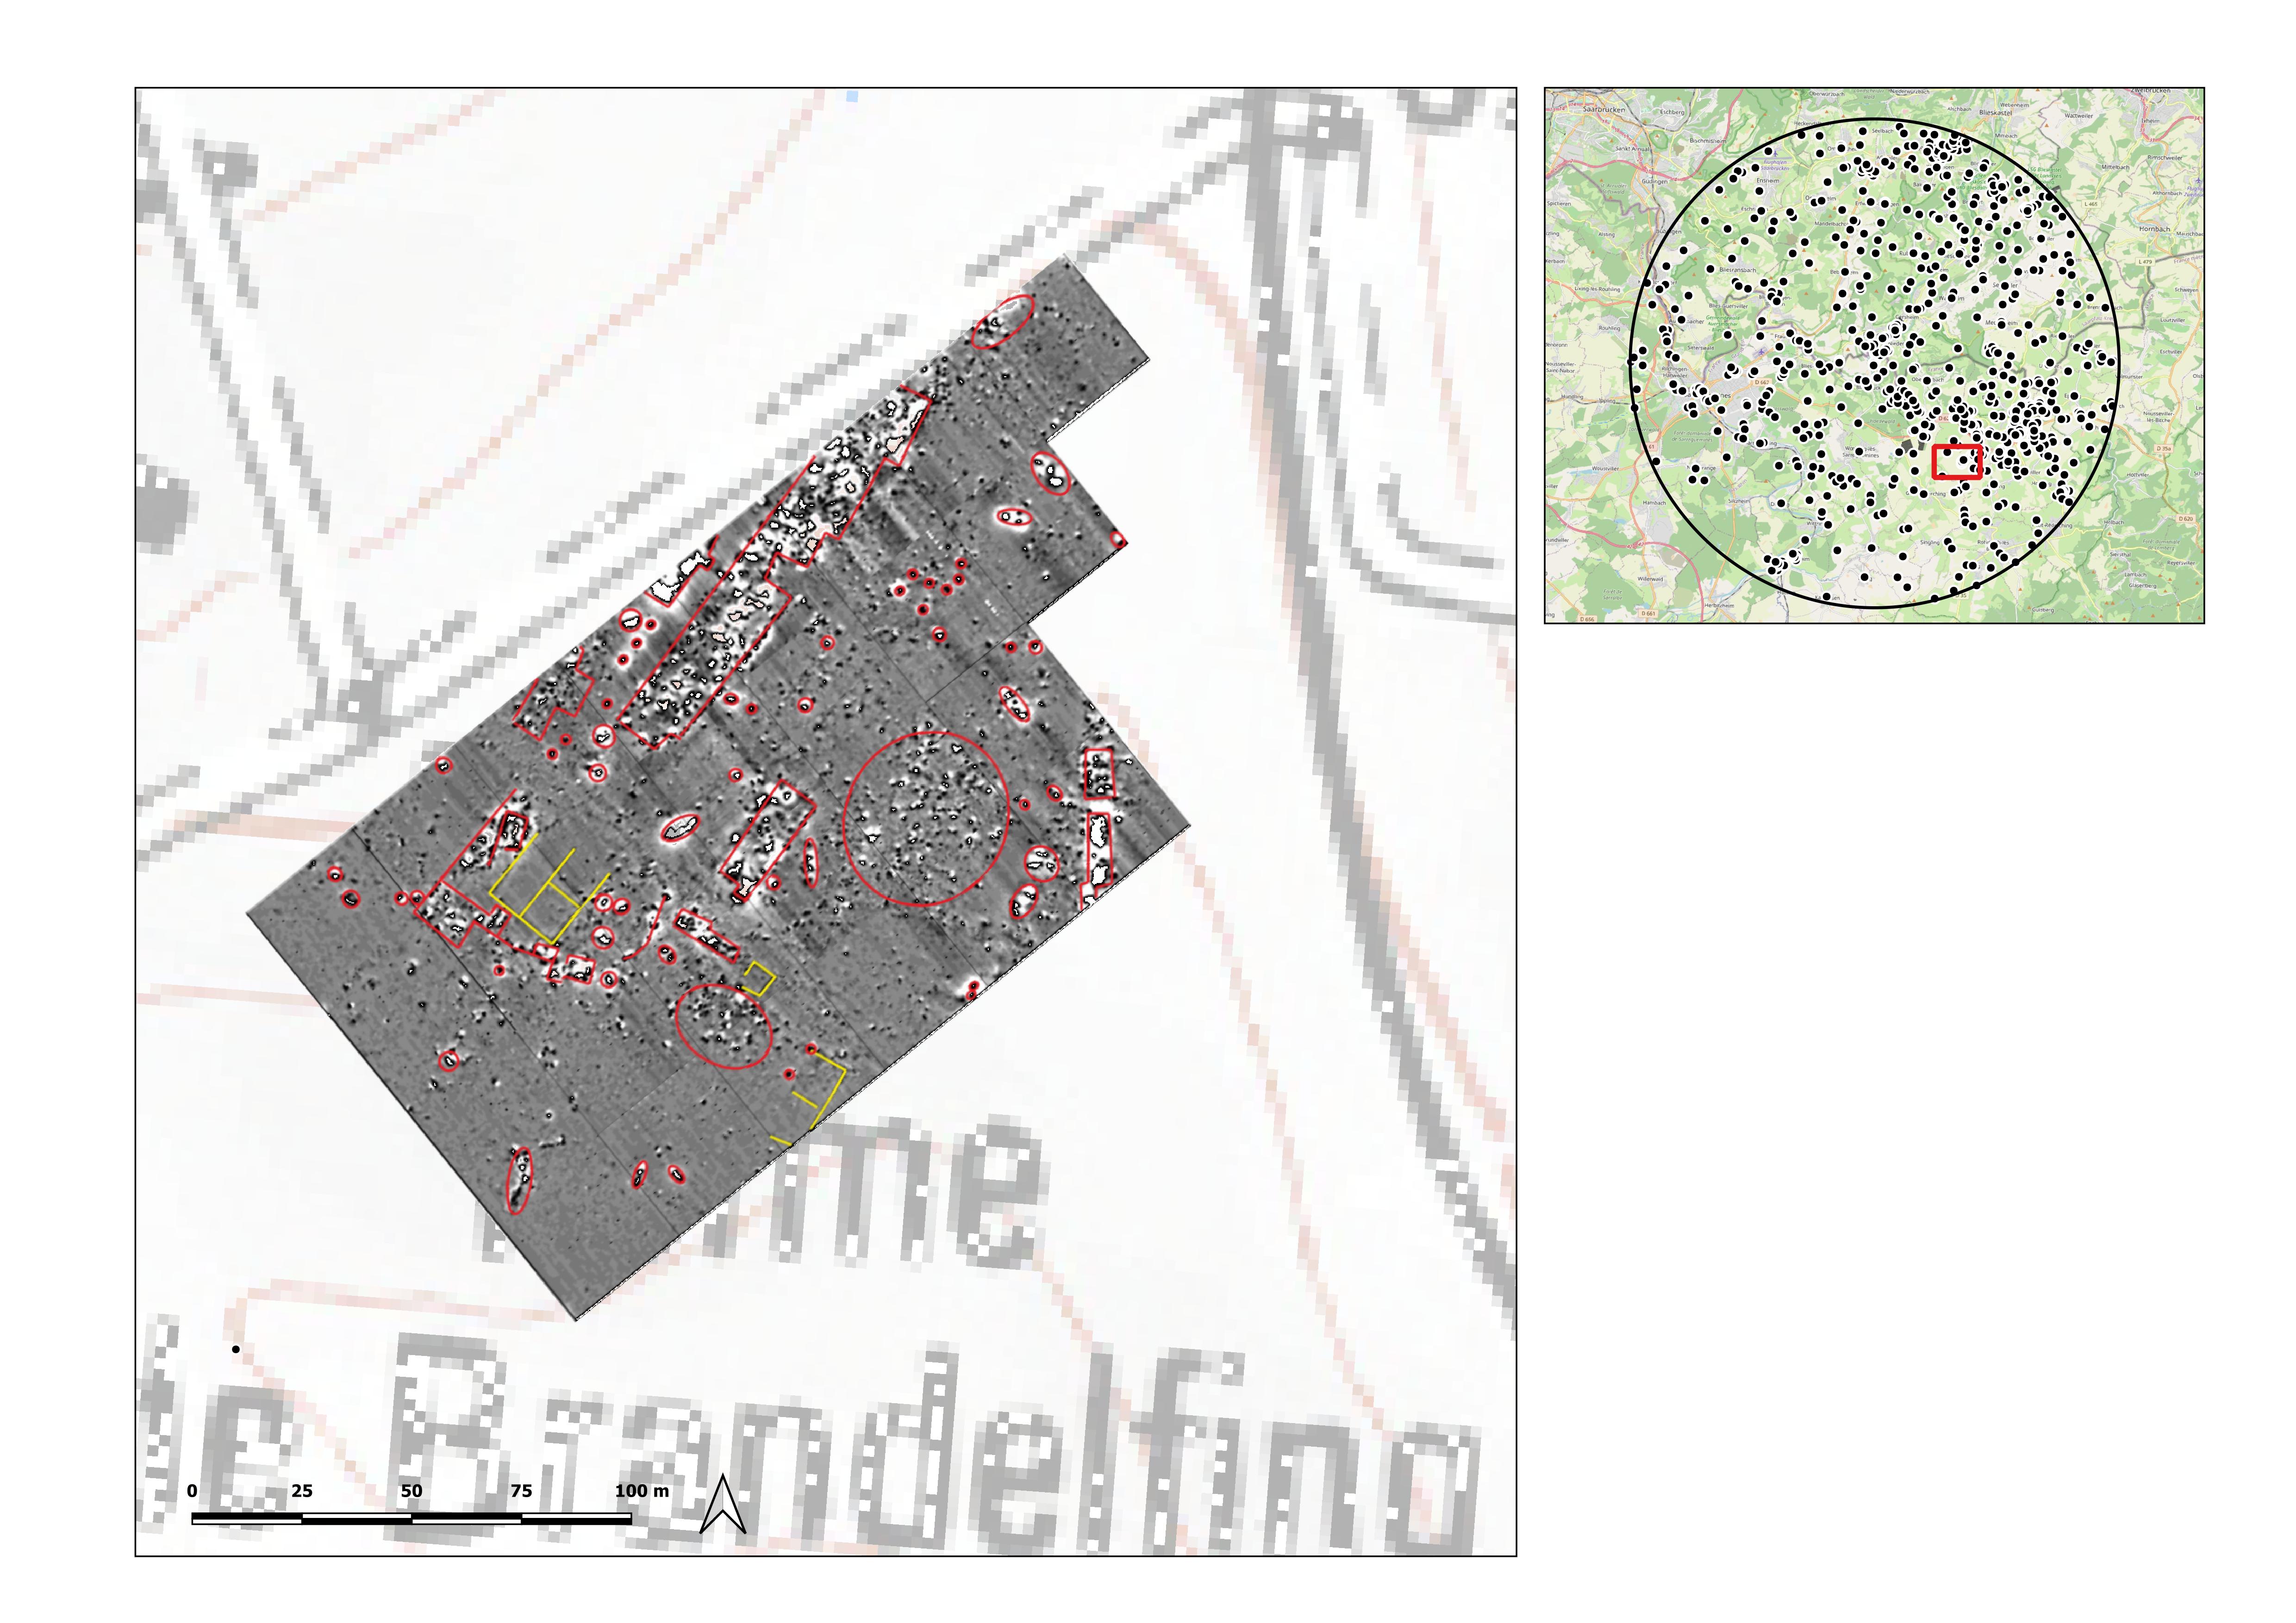  Figure 5. Measurement result of a geomagnetic prospection at Ferme de Brandelfing. Most of the recognisable structures are likely to be from the farm destroyed in the Second World War. 